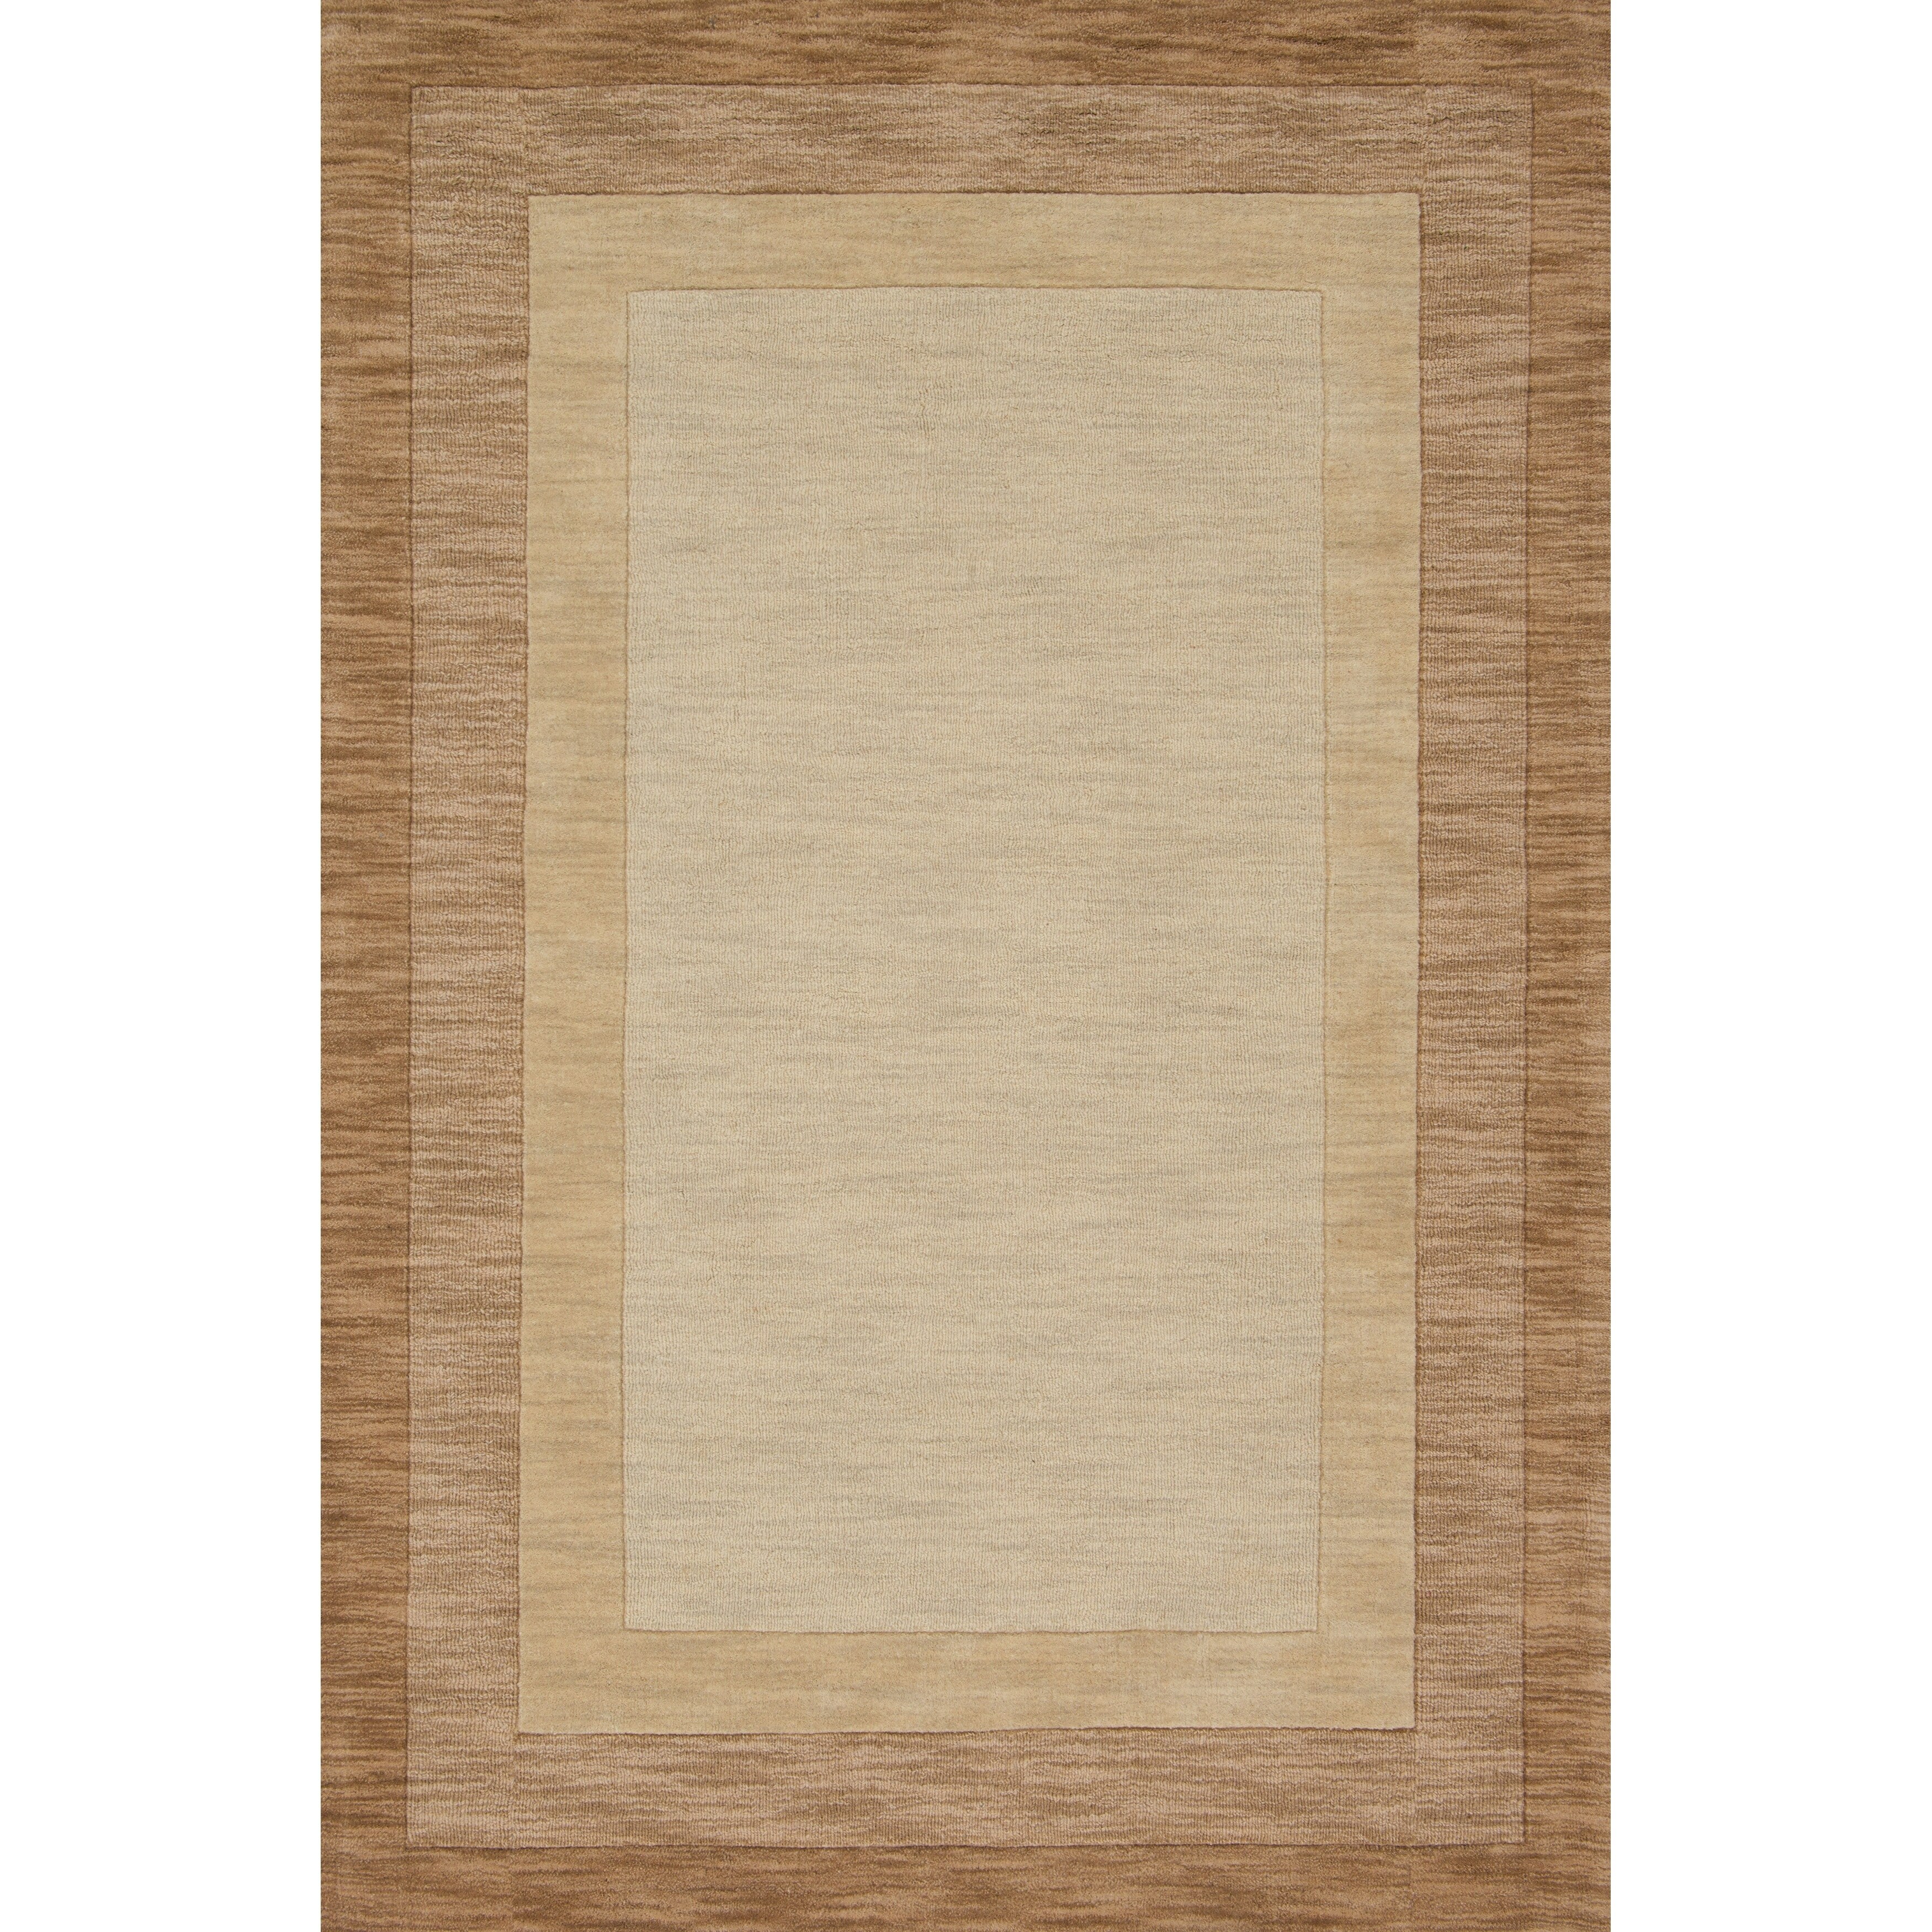 Buy Brown 4 X 6 Area Rugs Online At Overstockcom Our Best Rugs